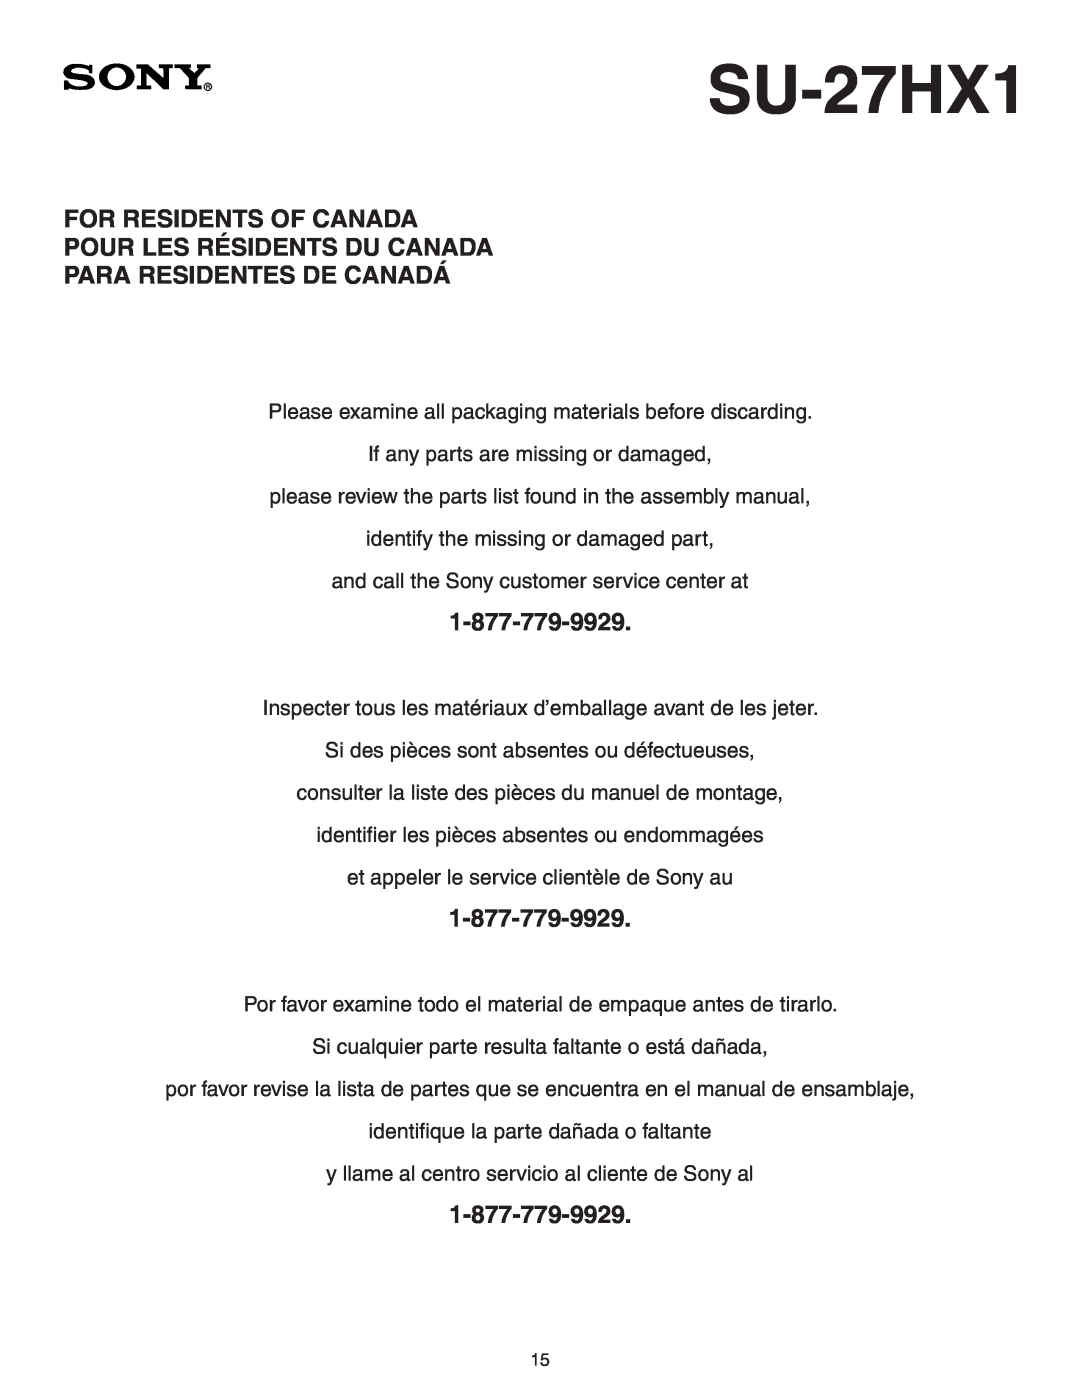 Sony SU-27HX1 manual For Residents Of Canada, Pour Les Résidents Du Canada, Para Residentes De Canadá 